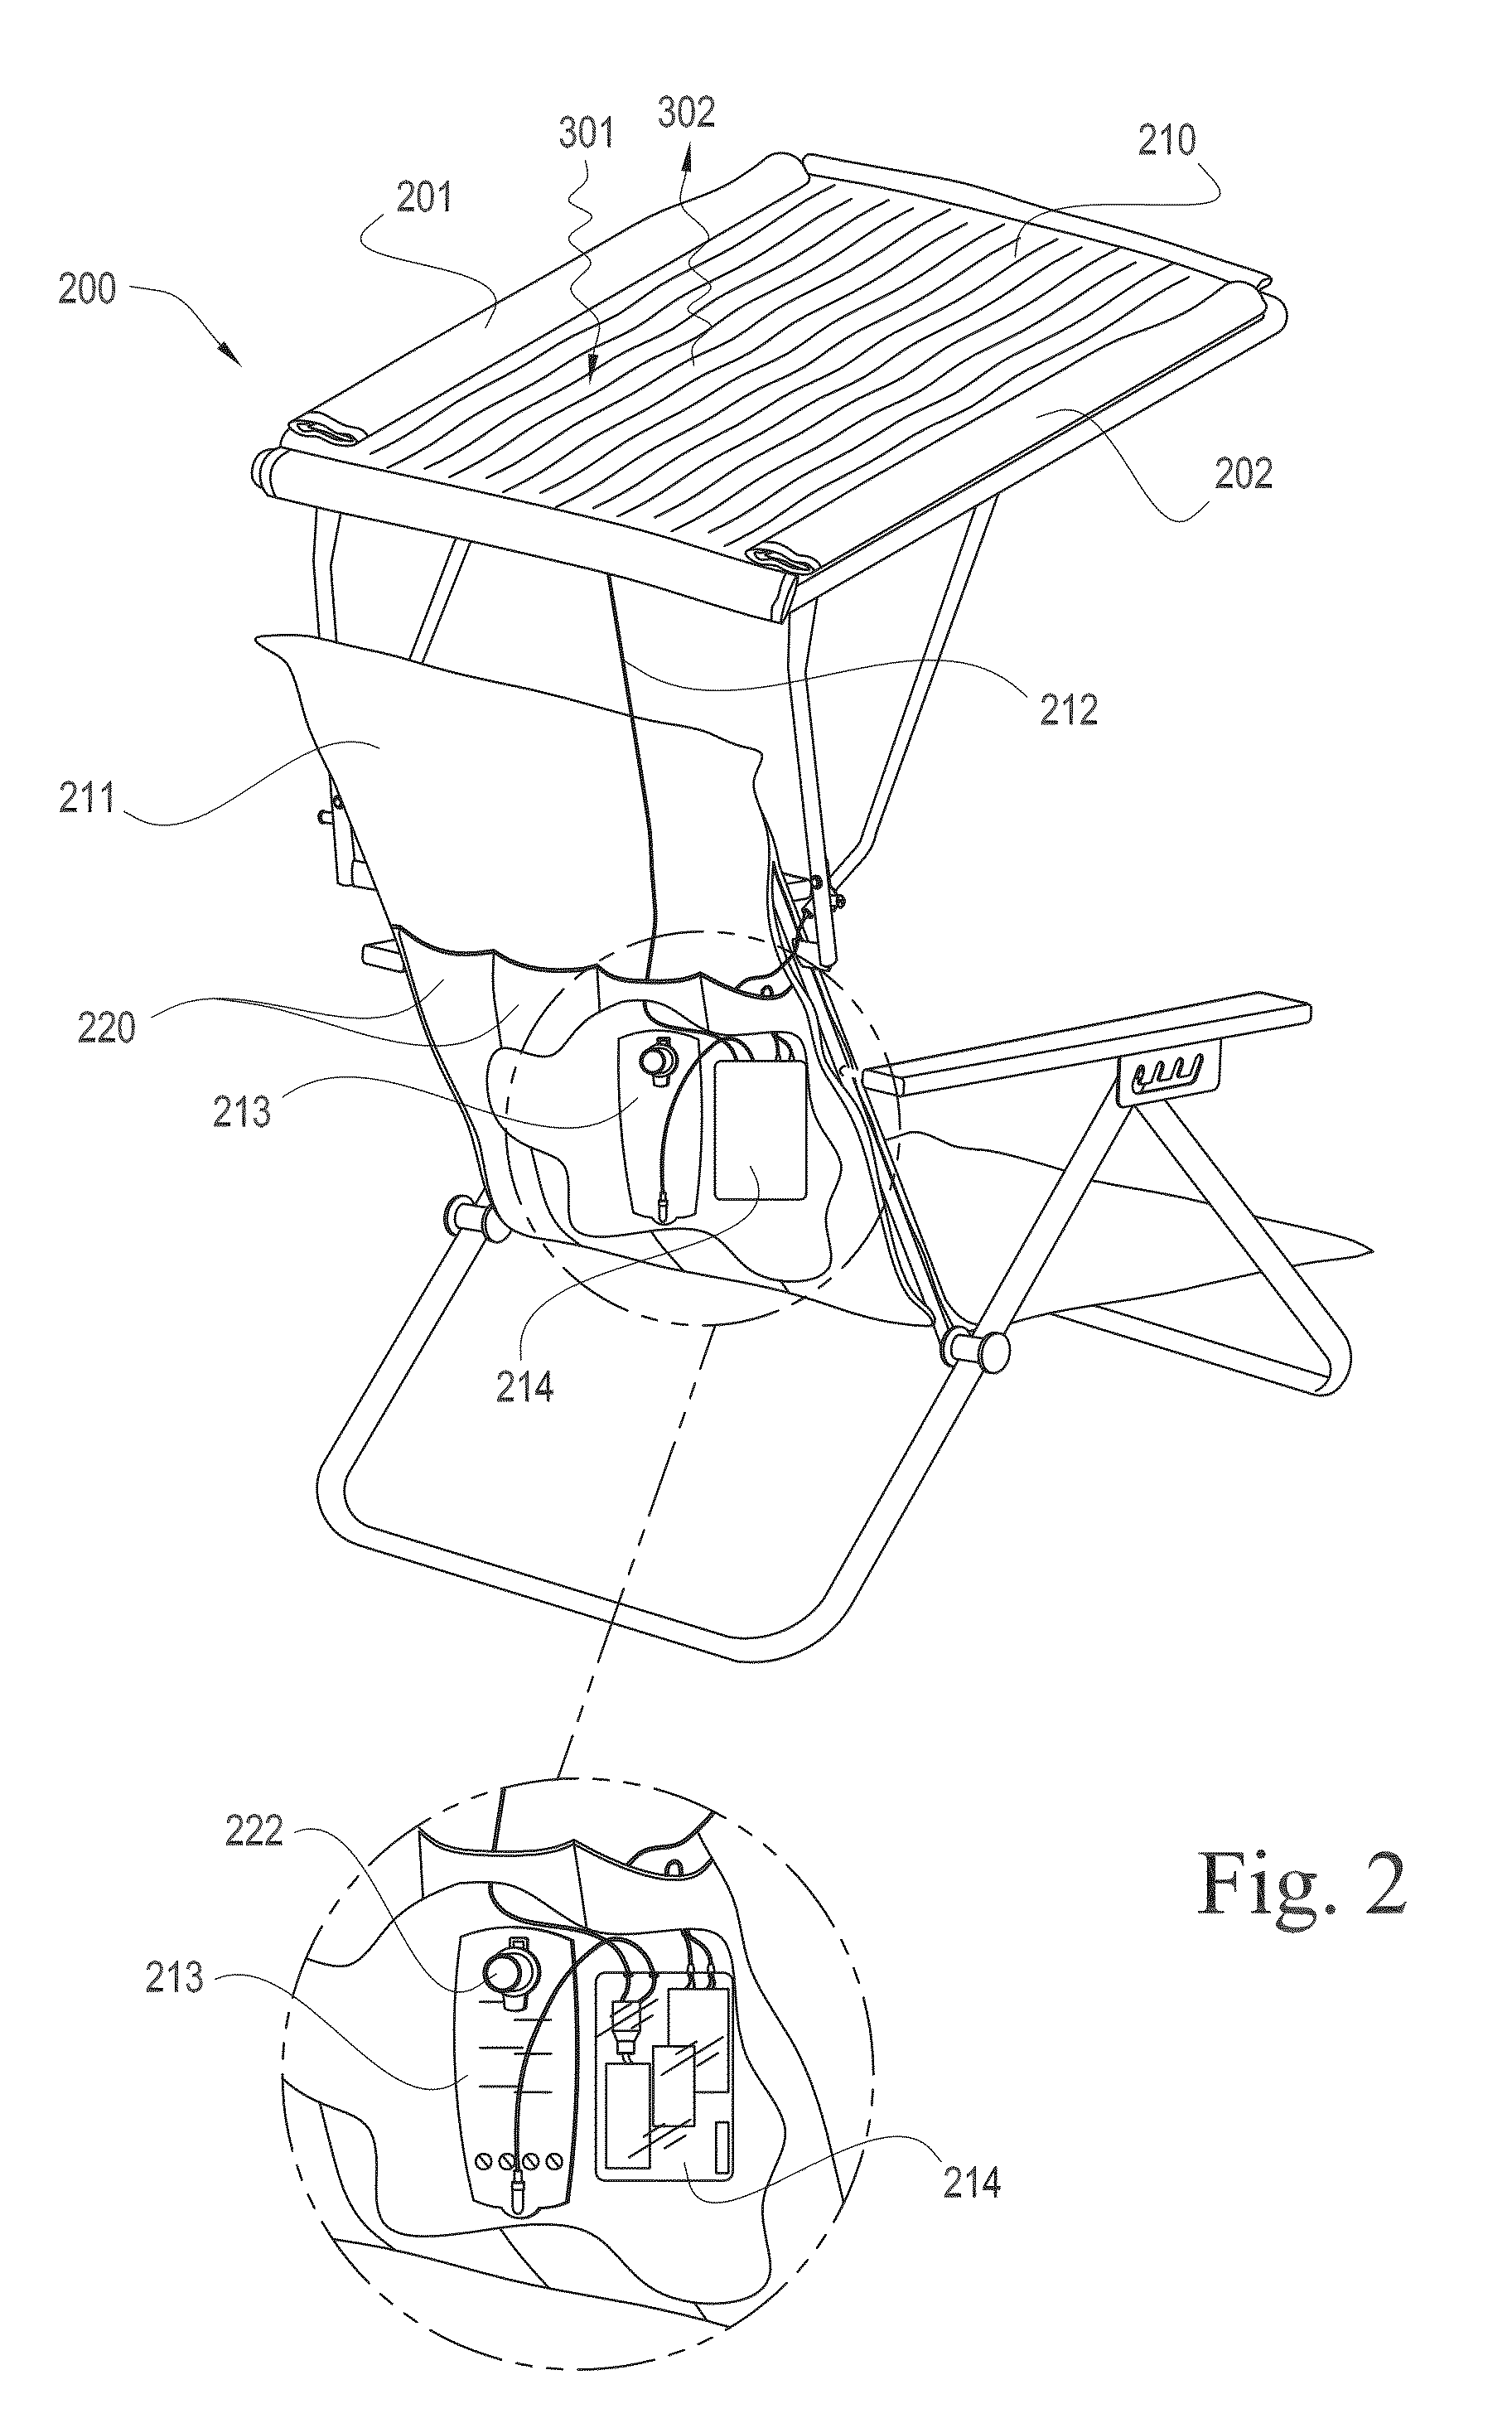 Portable Cooling Chamber Having Radiant Barrier and Cooling System